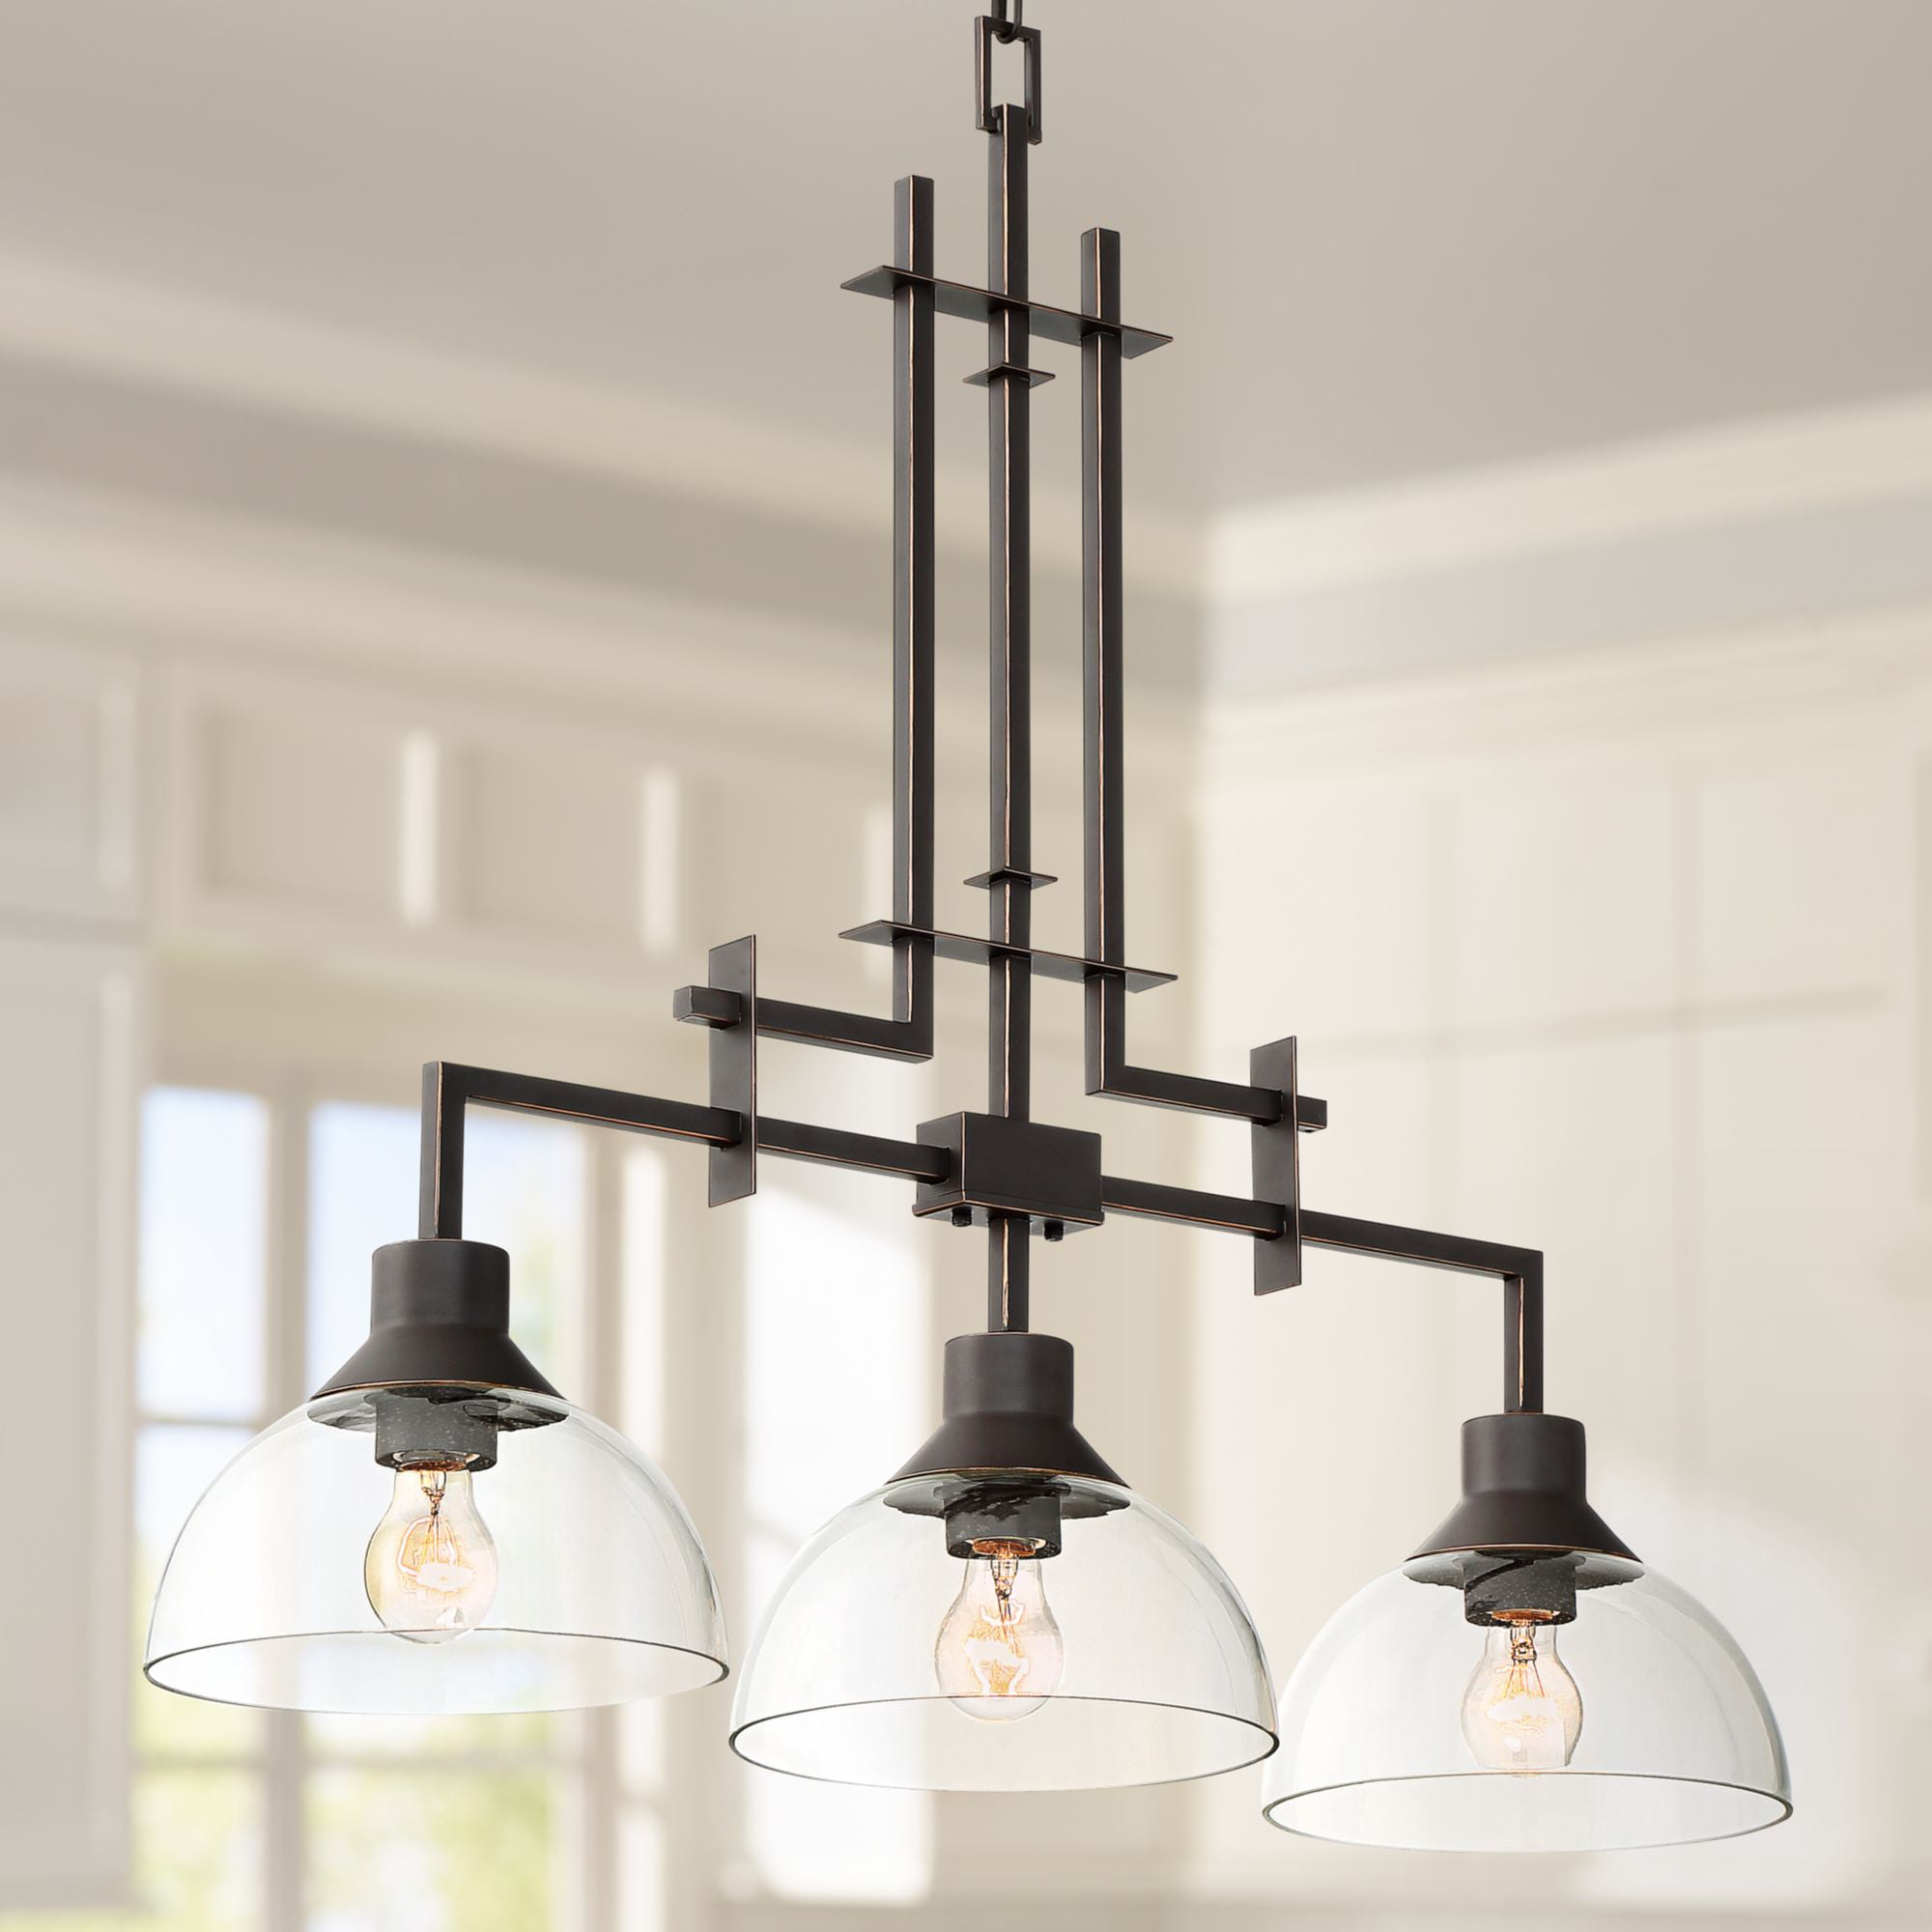 Matte Black Finish with Clear Glass Shade PDA1147-MBK Eapudun Industrial Linear Chandeliers for Kitchen Island 4-Light Contemporary Metal Ceiling Pendant Lighting Adjustable Height